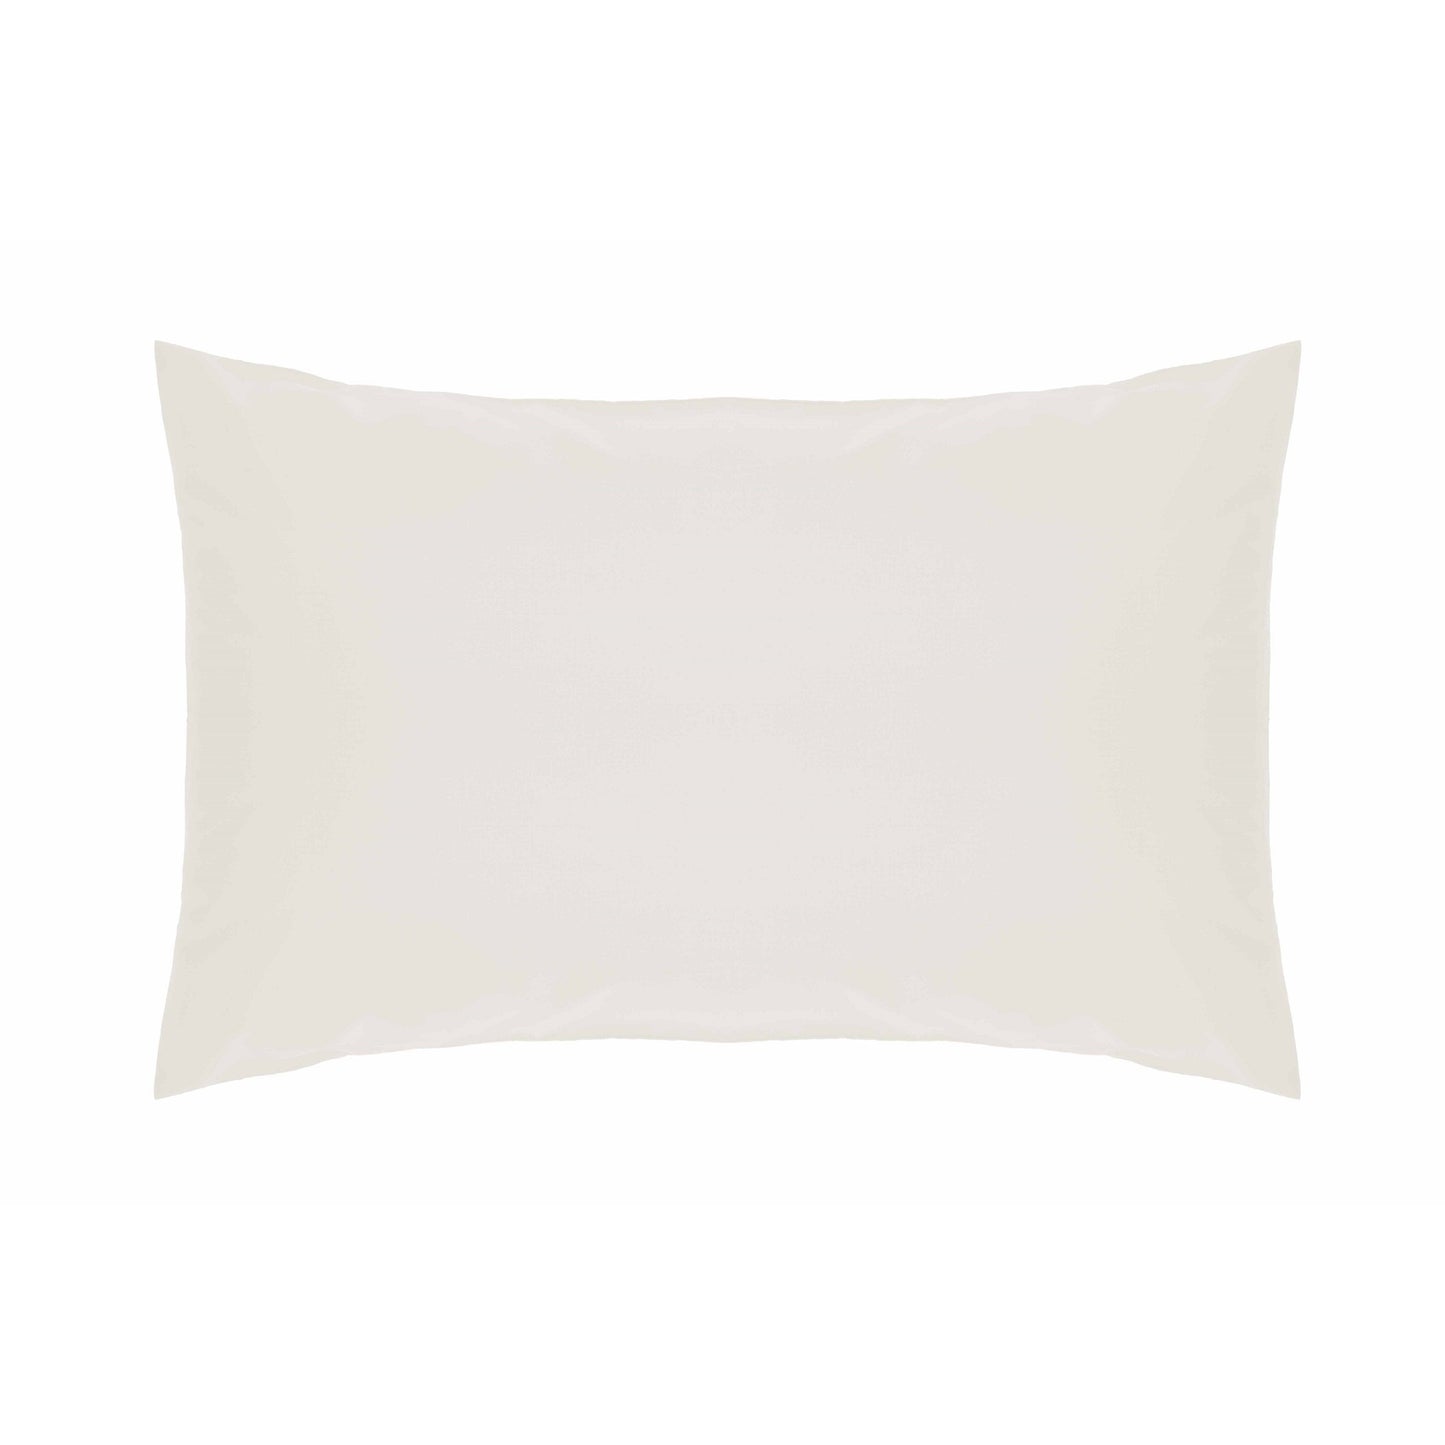 Belledorm-Housewife Pillowcase-Luxury Percale-200 Thread Count-Ivory